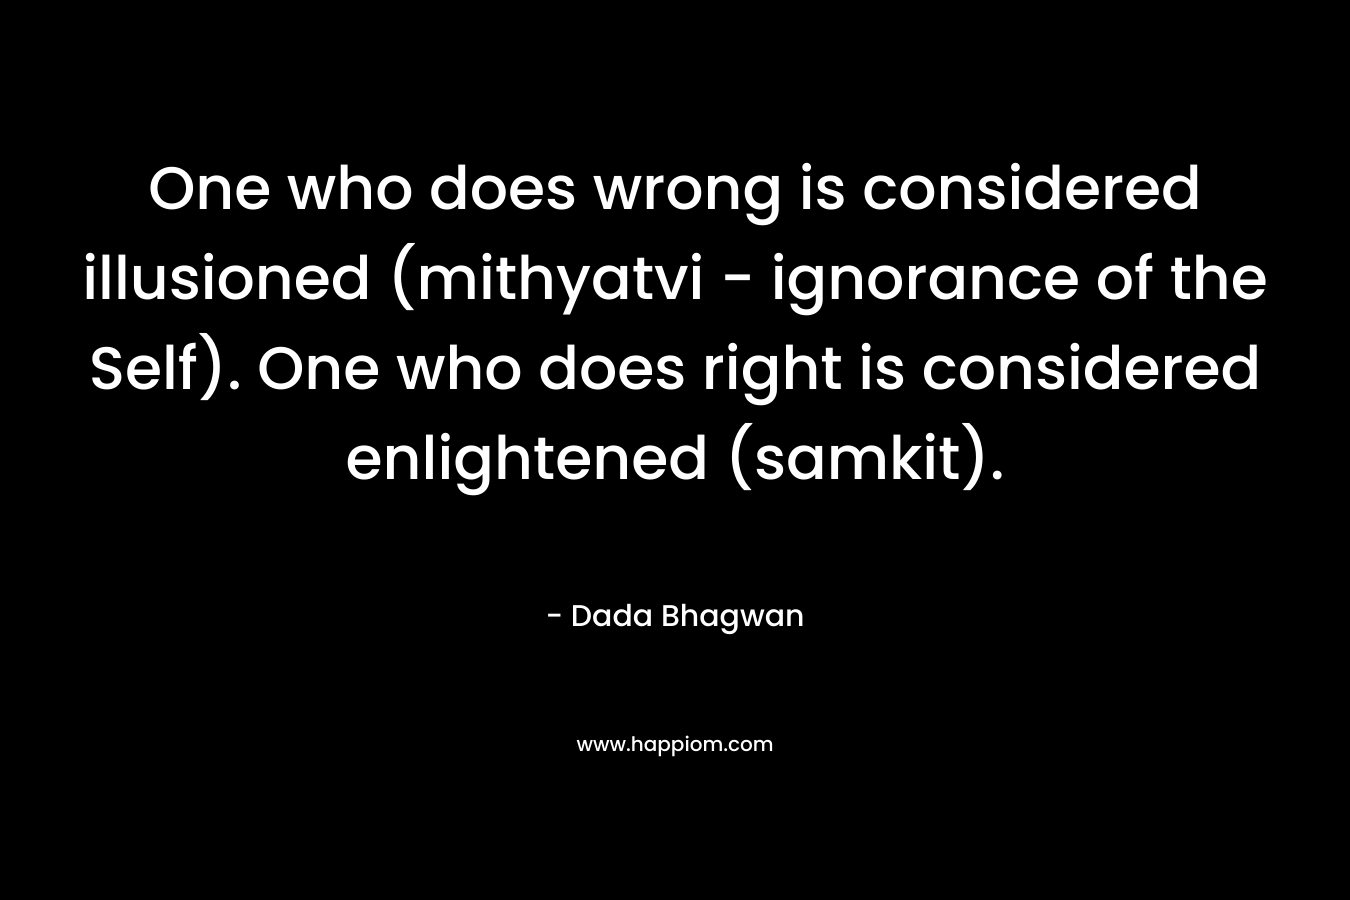 One who does wrong is considered illusioned (mithyatvi - ignorance of the Self). One who does right is considered enlightened (samkit).